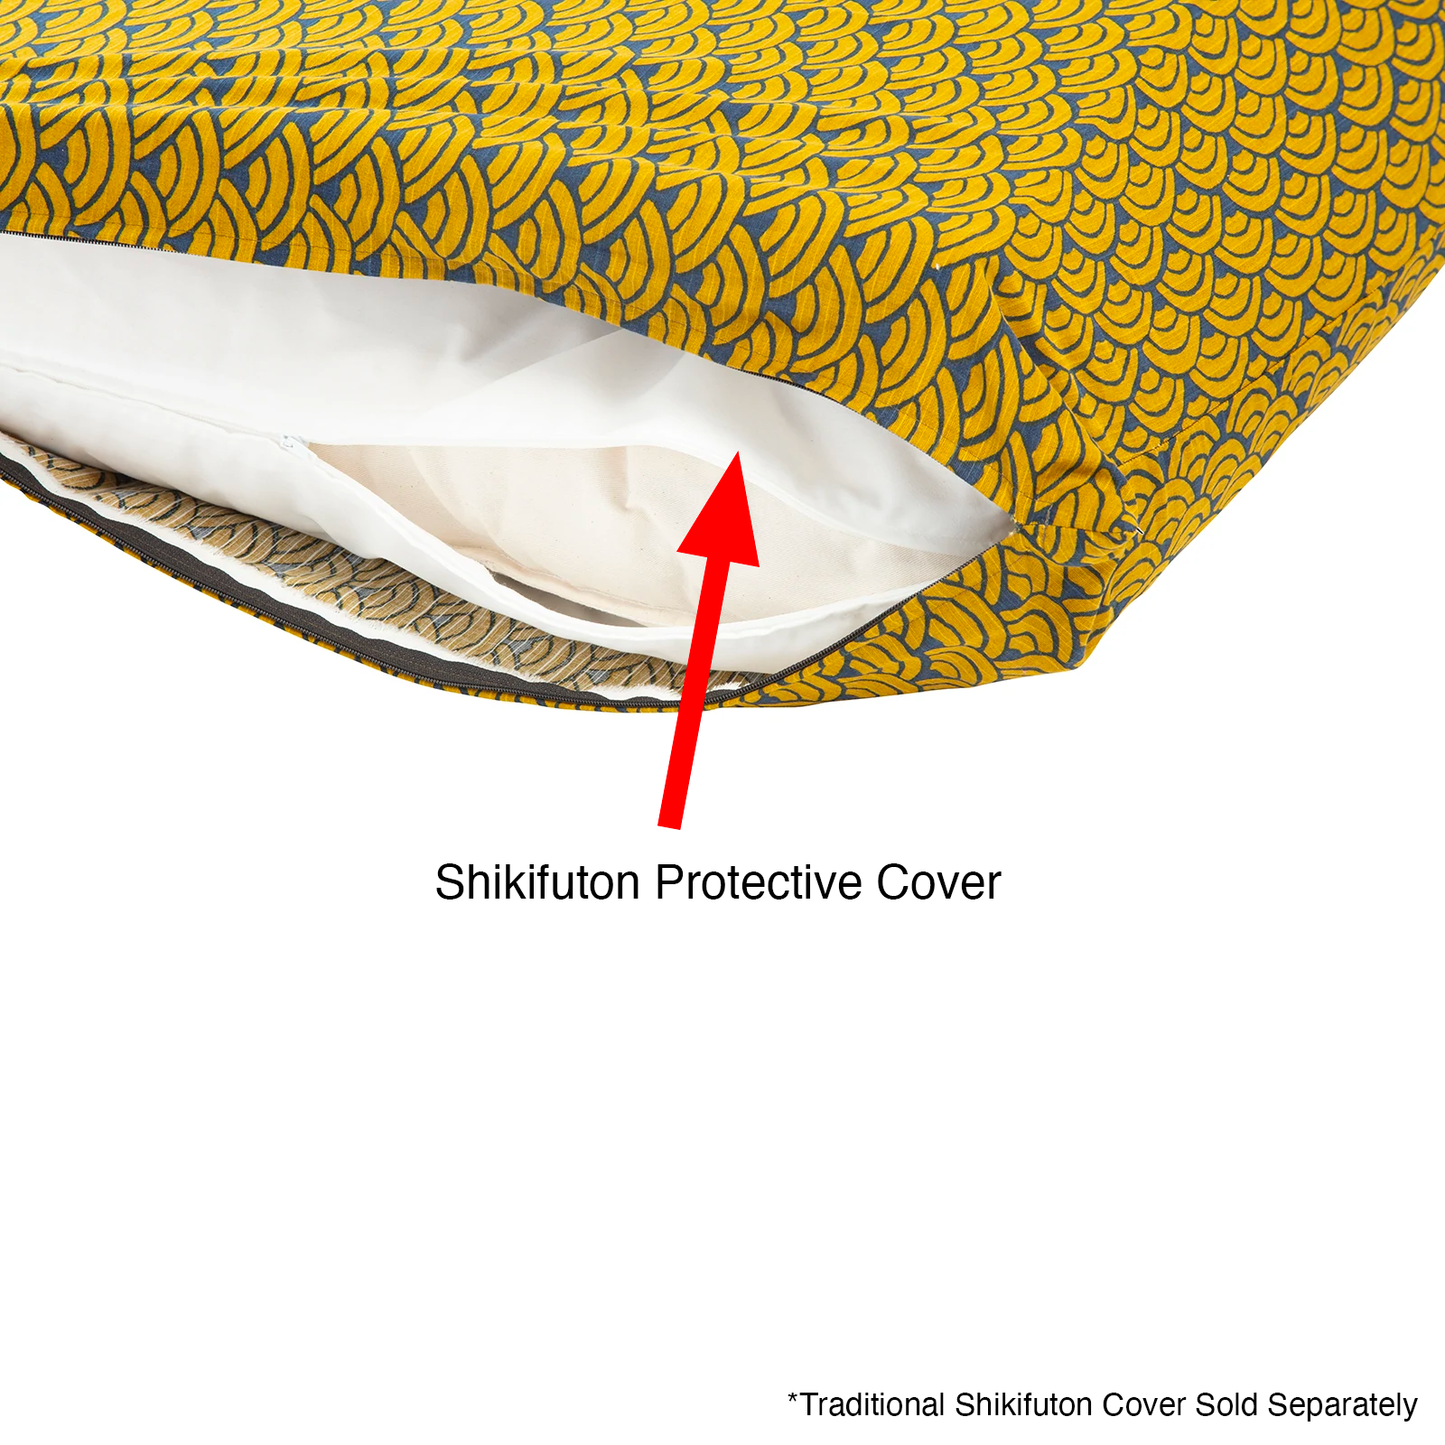 Corner angle of shikifuton mattress shown with protective cover and shikifuton cover in "seika ha green" over it. Both covers are partially unzipped to show the 3 products, and a large red arrow labels the shikifuton protective cover. At the bottom of the image, there is text that reads "Traditonal Shikifuton Cover Sold Separately." The backdrop is solid white.